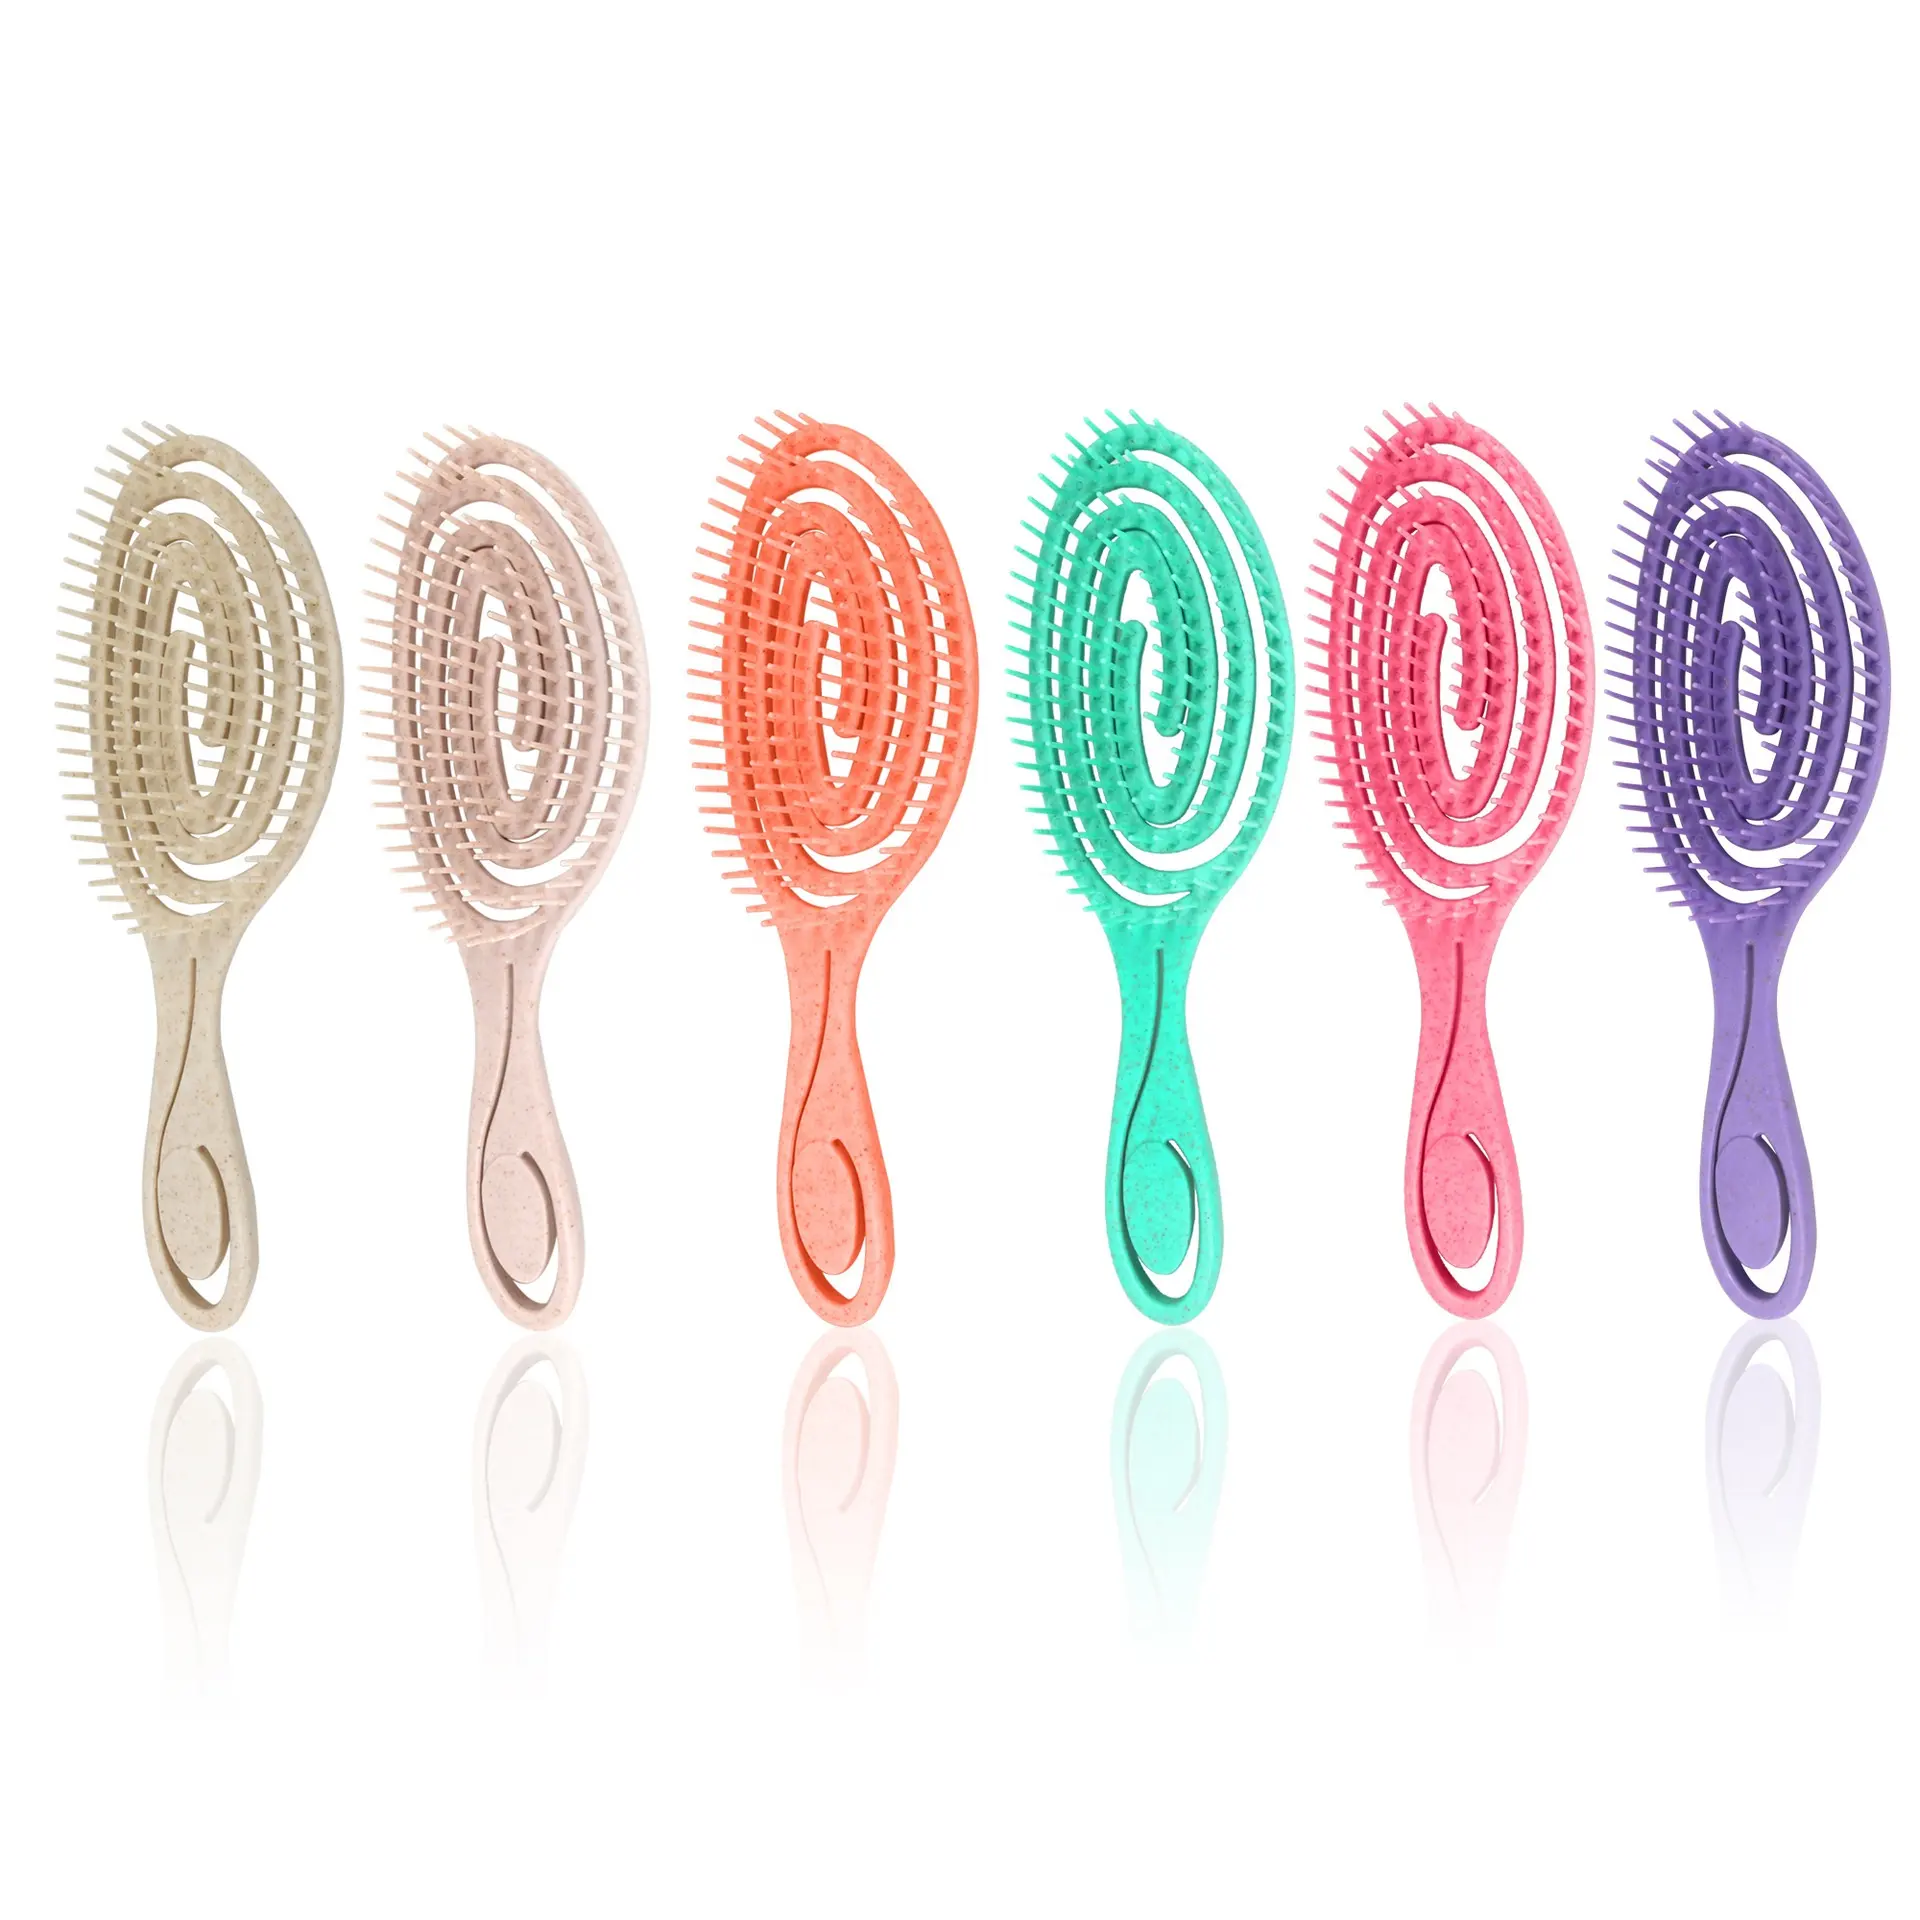 New Fashion Curved & Vented Design Detangling Hair Brush Hair Combs And Brush for Wet And Dry Hair